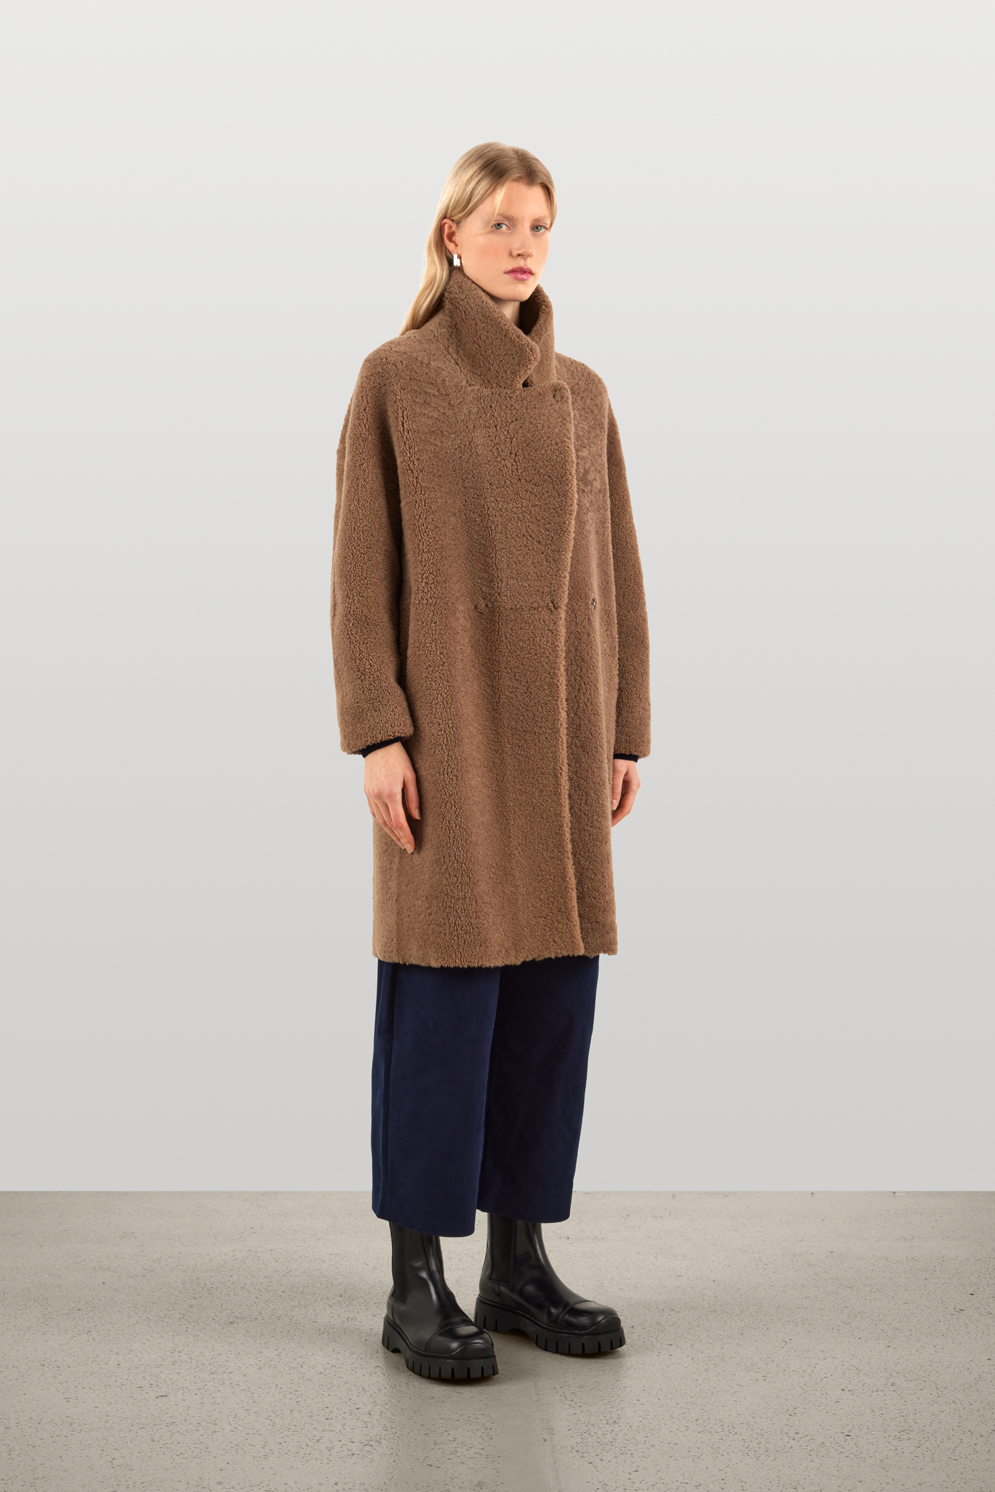 Notch Collar Shearling Coat in Camel | Women | Gushlow & Cole - model length with coat done up